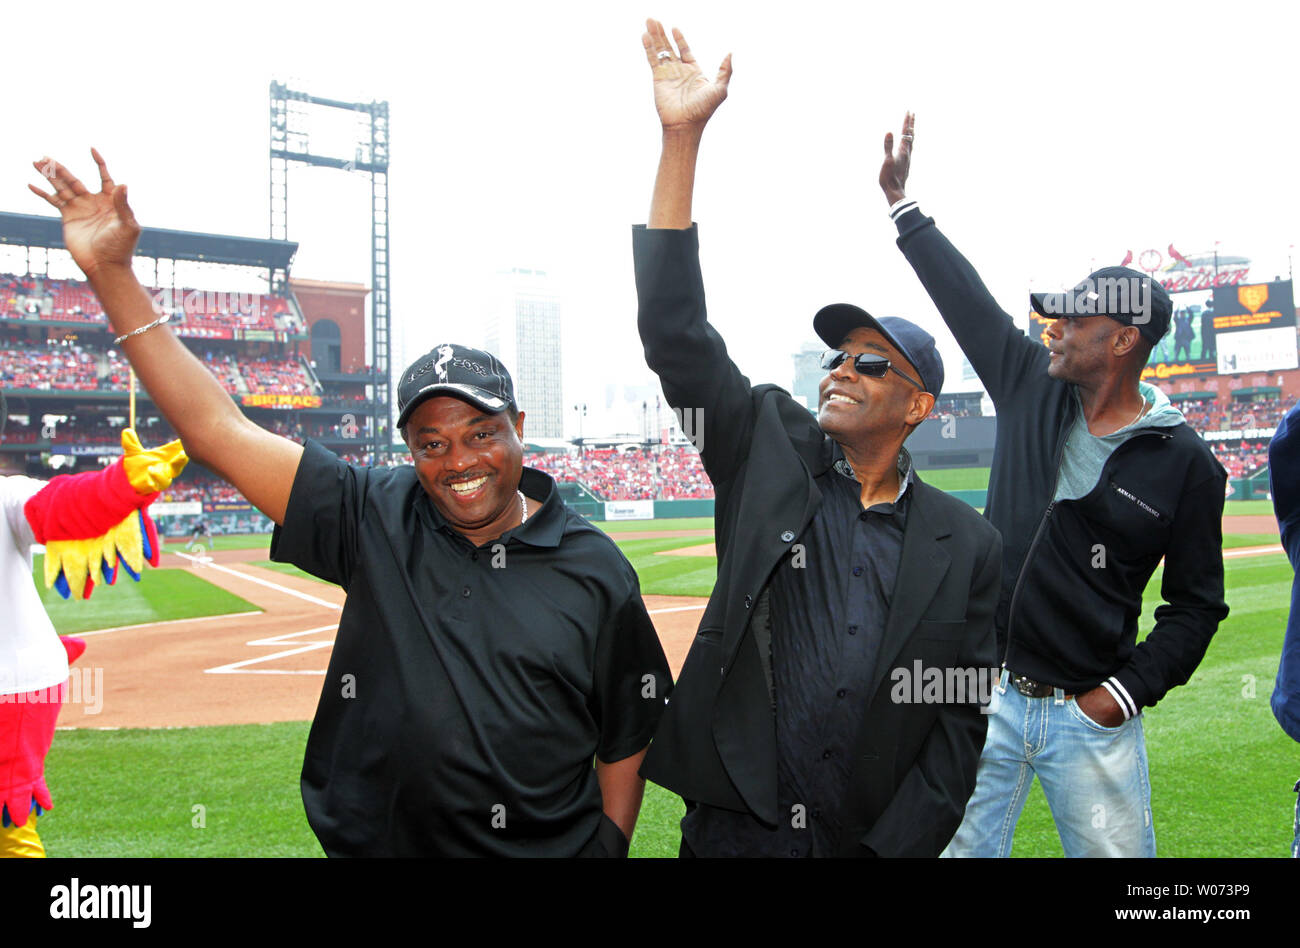 Members of the 1980's group Kool and the Gang wave to fans after being introduced before the Milwauke Brewers-St. Louis Cardinals baseball game at Busch Stadium in St. Louis on April 29, 2012. They are (L to R) Robert 'Kool' Bell, Ronald Bell and George Brown. UPI/Bill Greenblatt Stock Photo